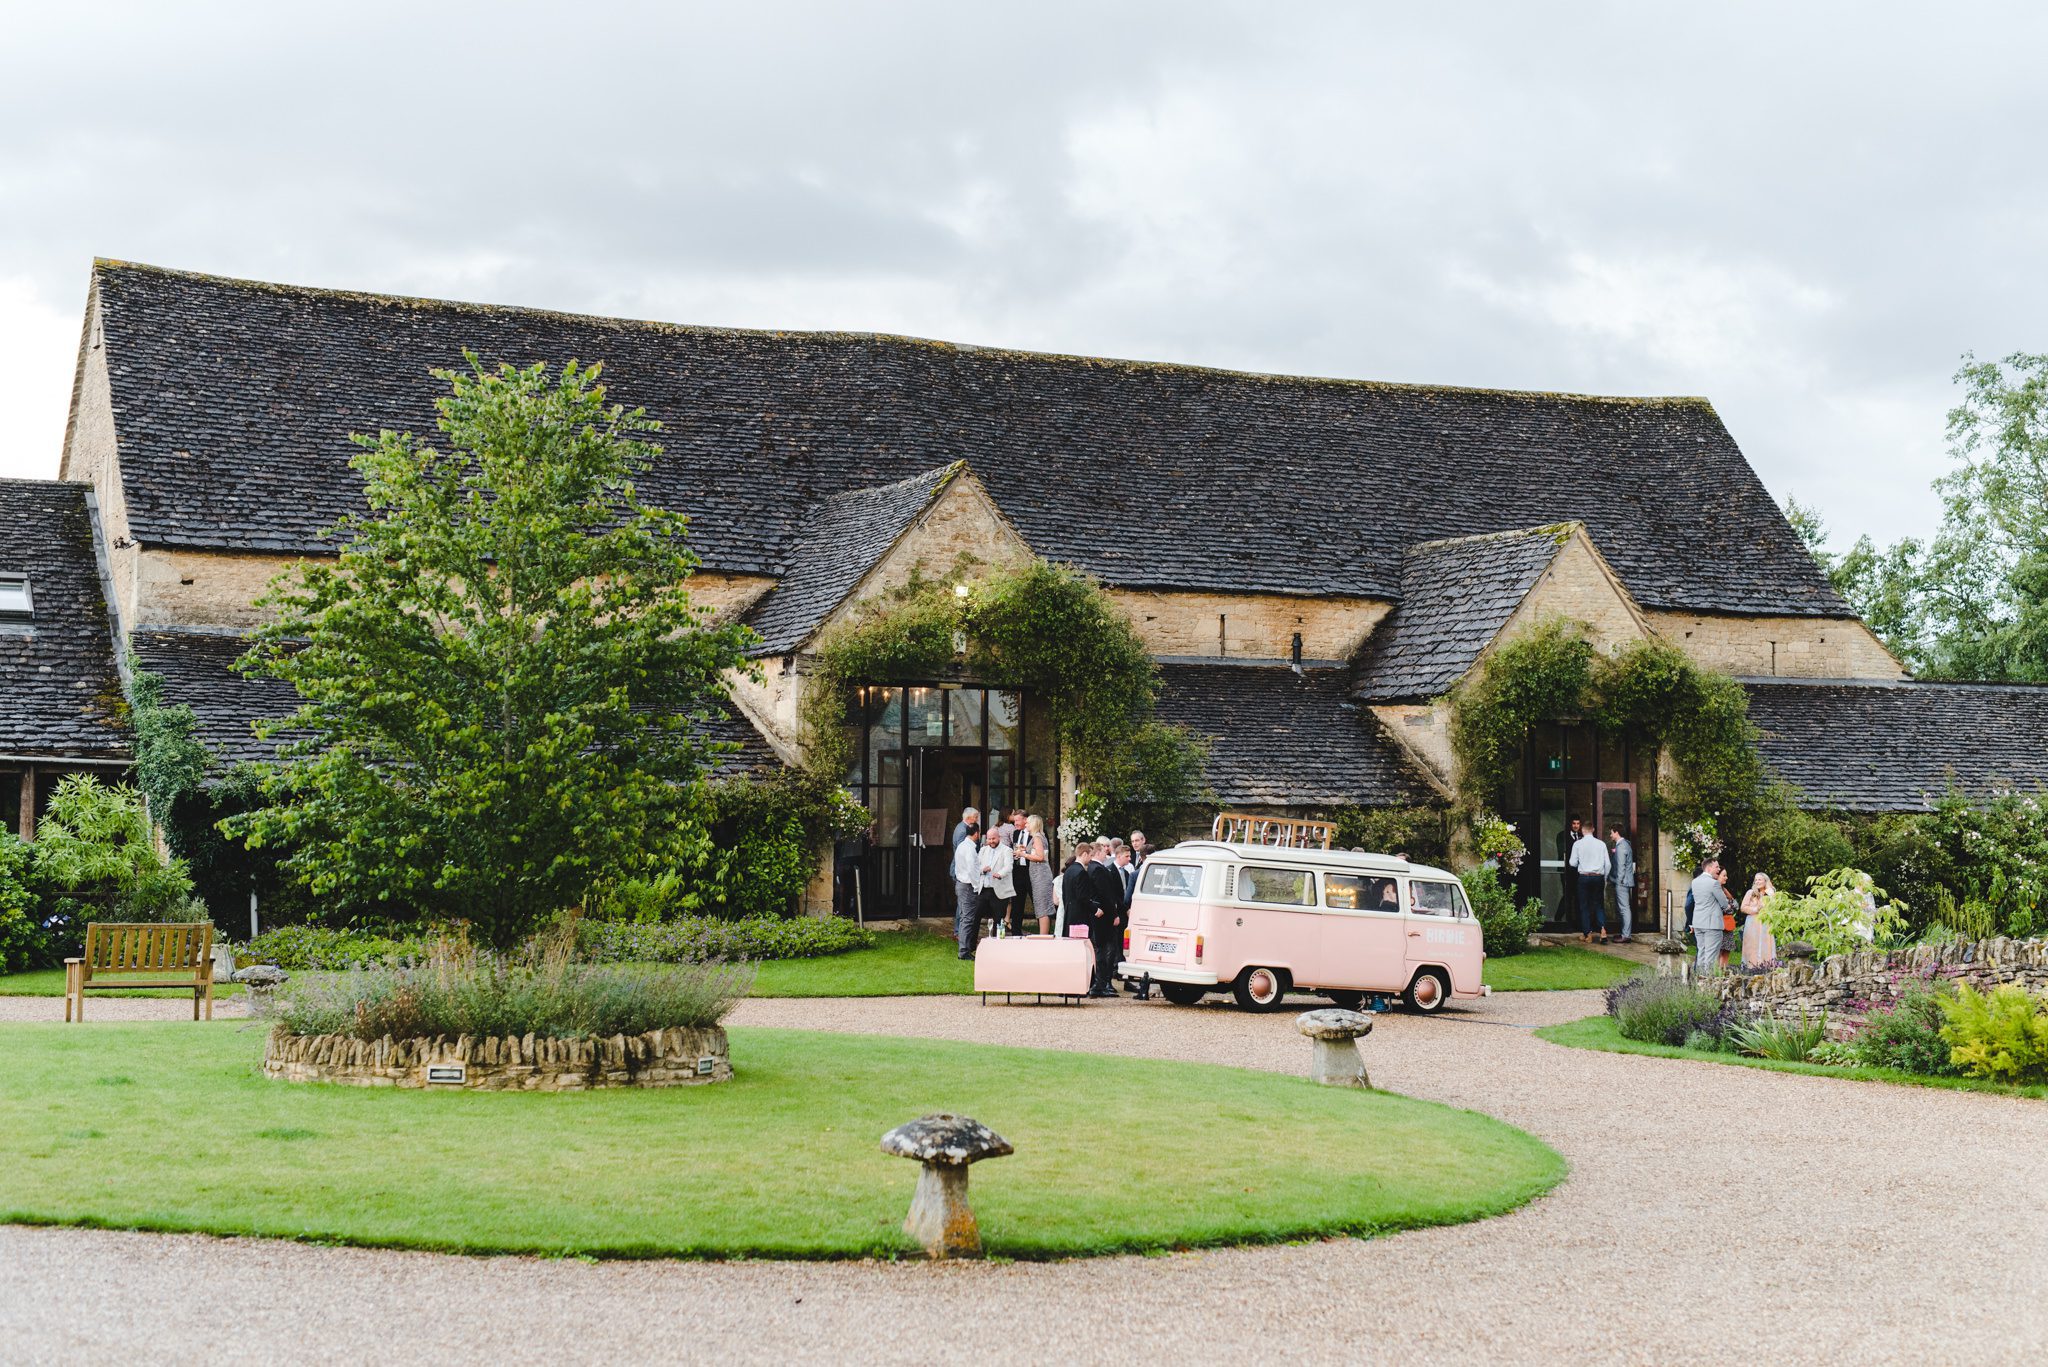 Outside view of the Great Tythe Barn